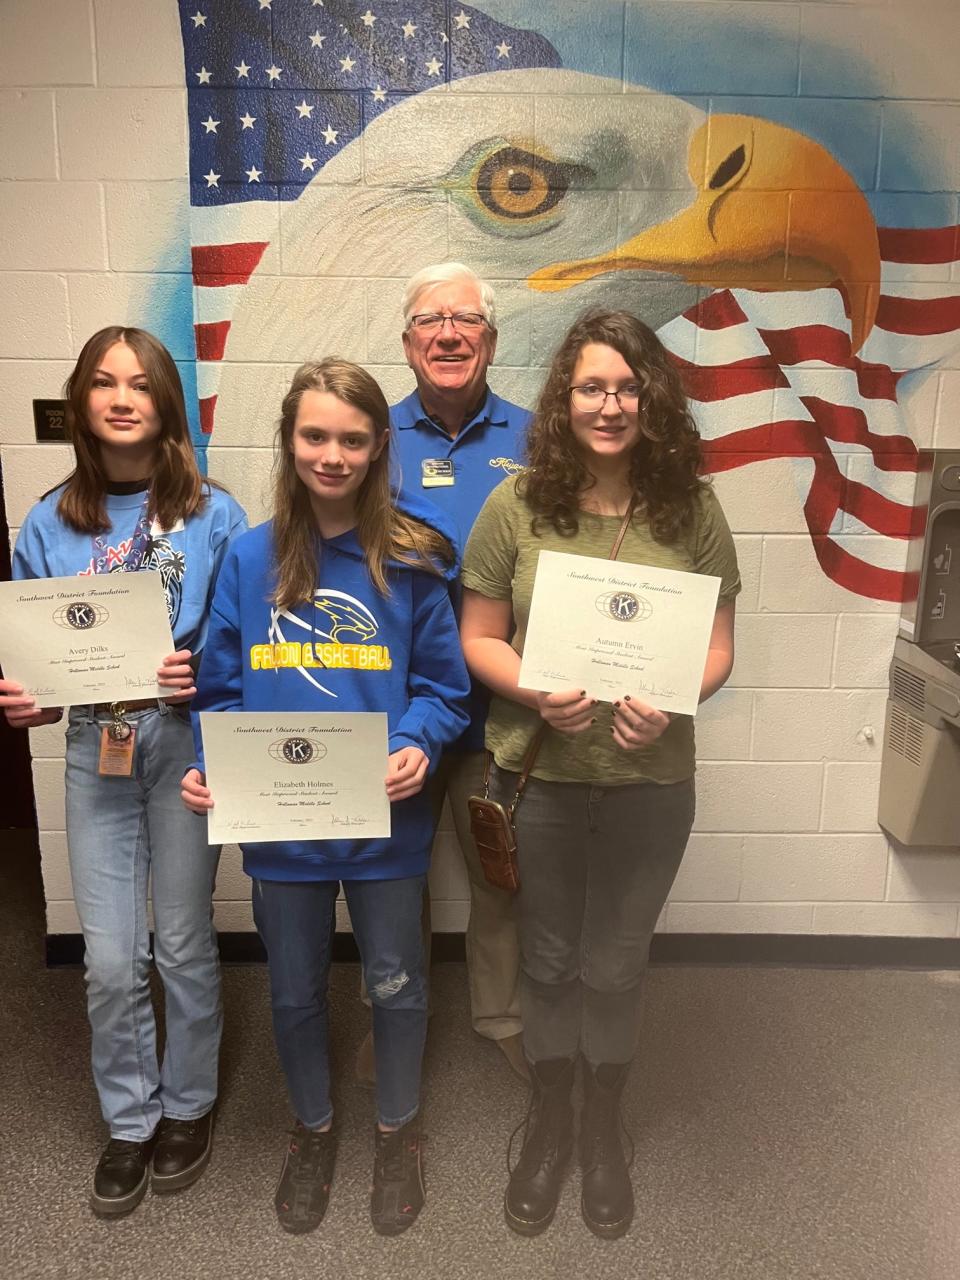 Pictured are Avery Dilks, Elizabeth Holmes, Ned Kline (Kiwanis) and Autumn Ervin.